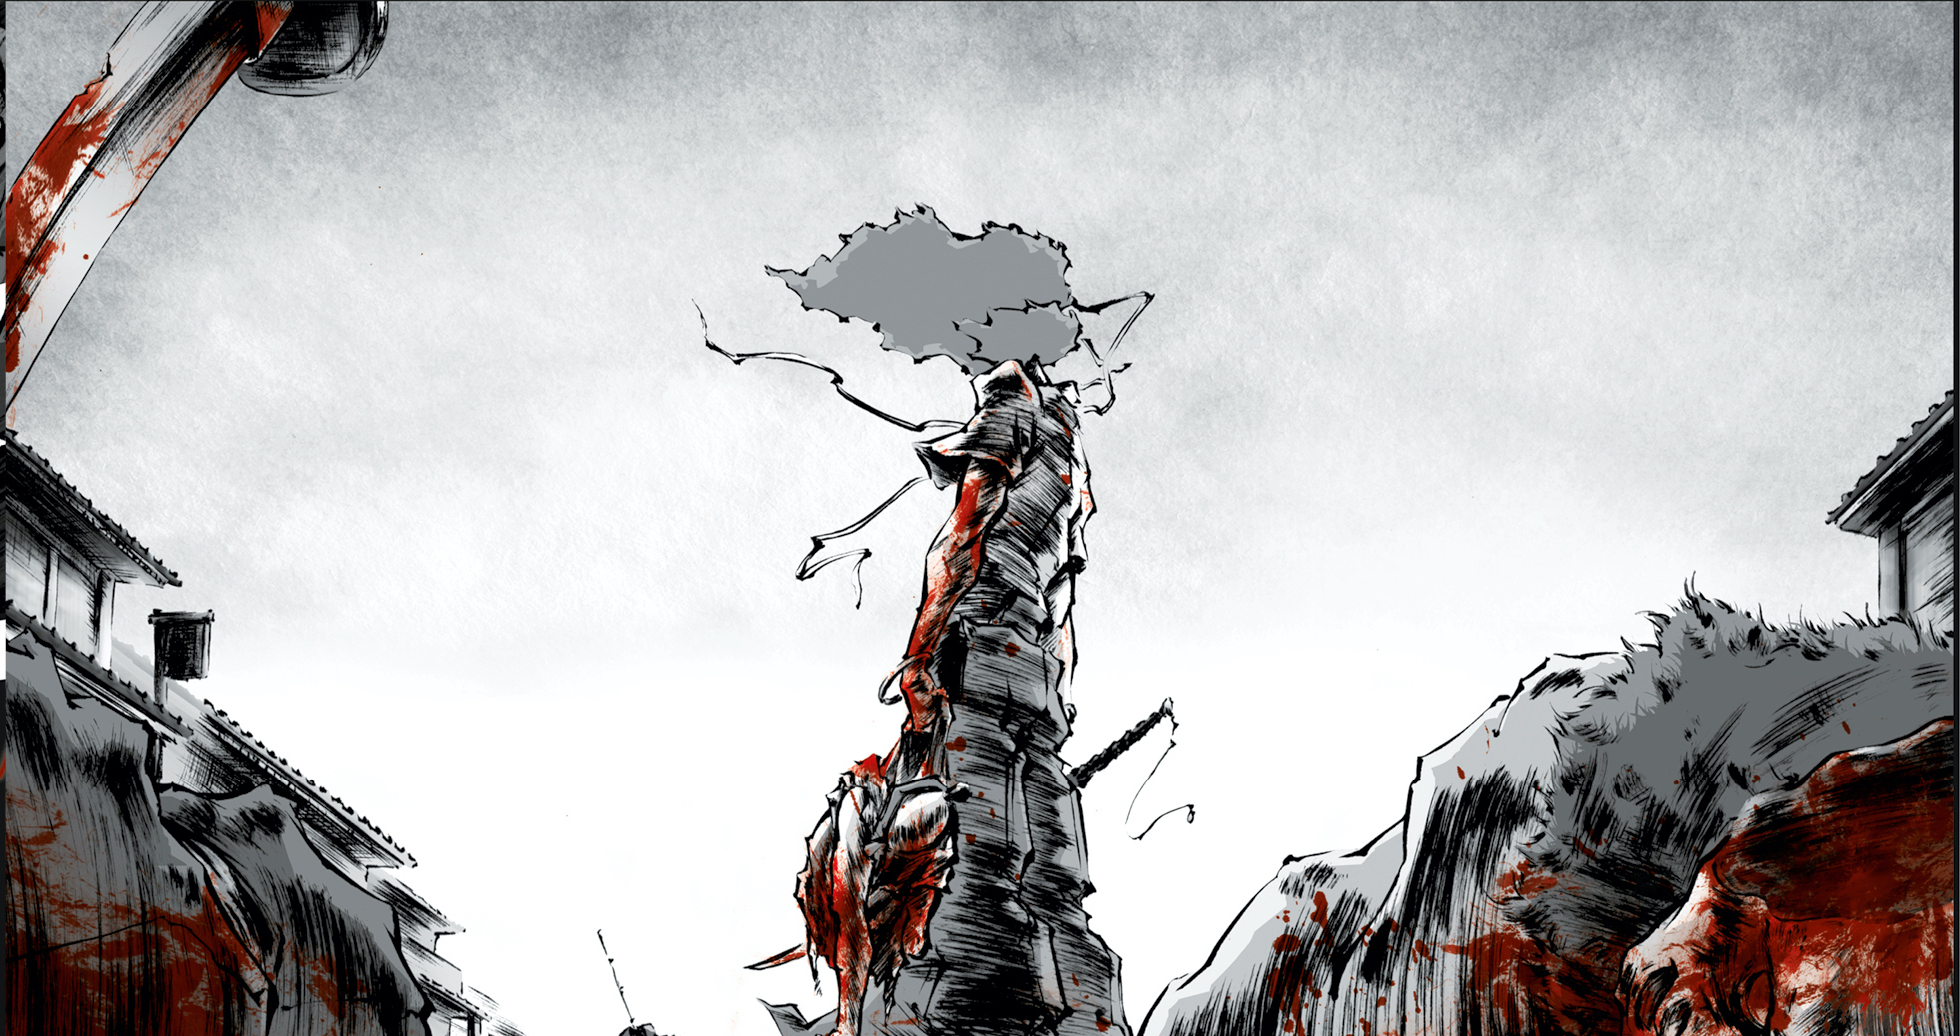 Review: AFRO SAMURAI Vol 1. - New Life for a Cult Classic